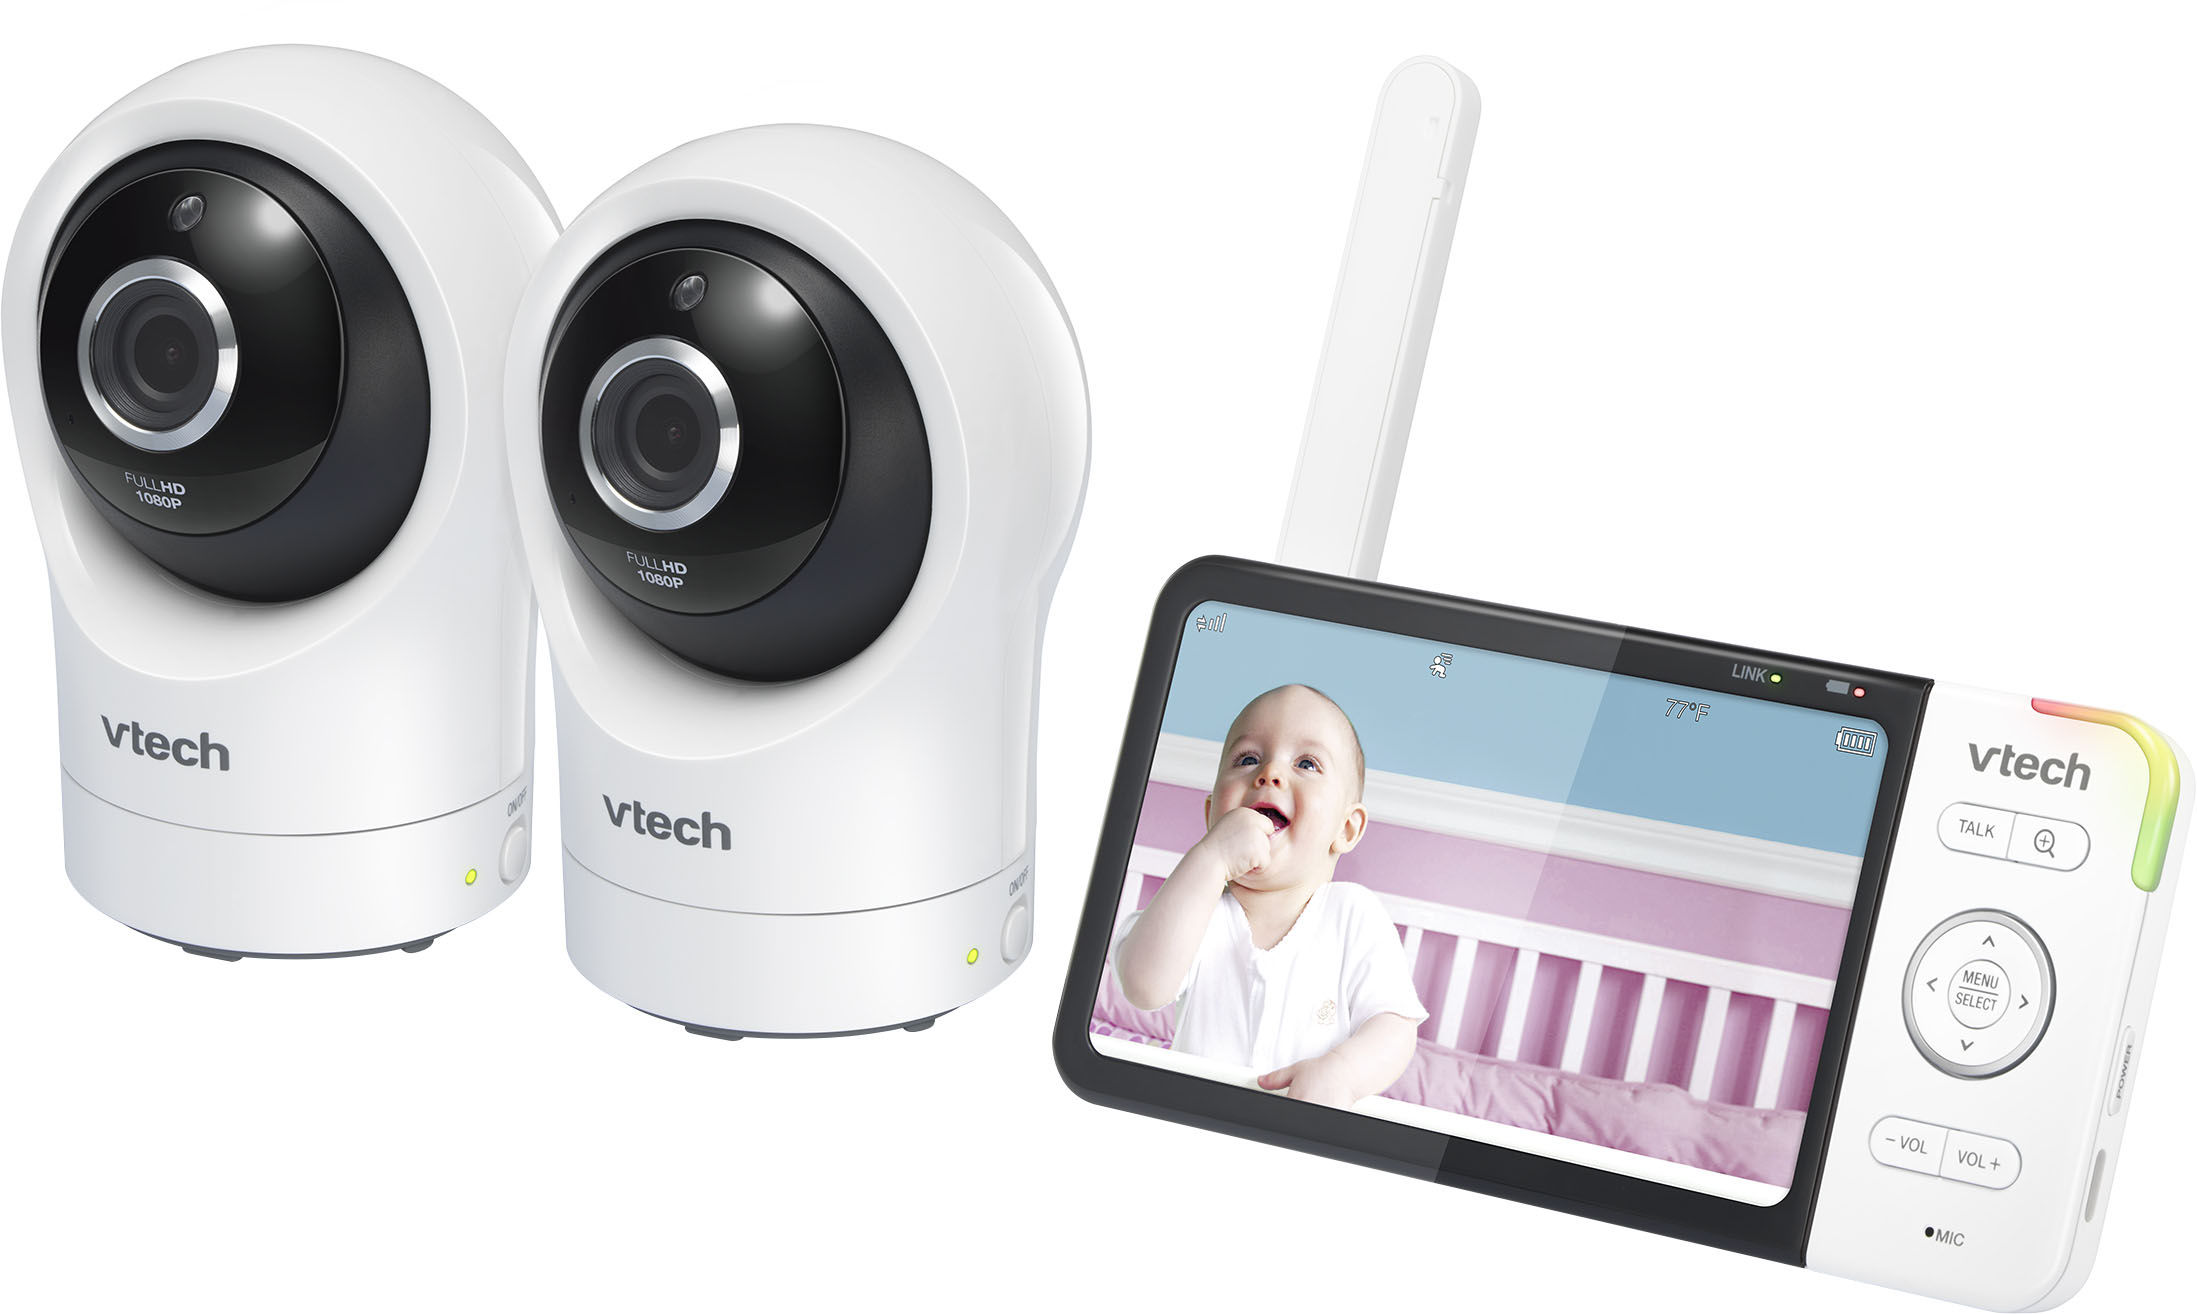 Angle View: VTech RM5764-2HD 1080p Smart WiFi Remote Access 2 Camera BabyMonitor, 360 Pan & Tilt, 5" 720p HD Display, Night Vision, Soothing Sounds, 2-Way Talk, Temperature & Motion Detection, iOS & Android